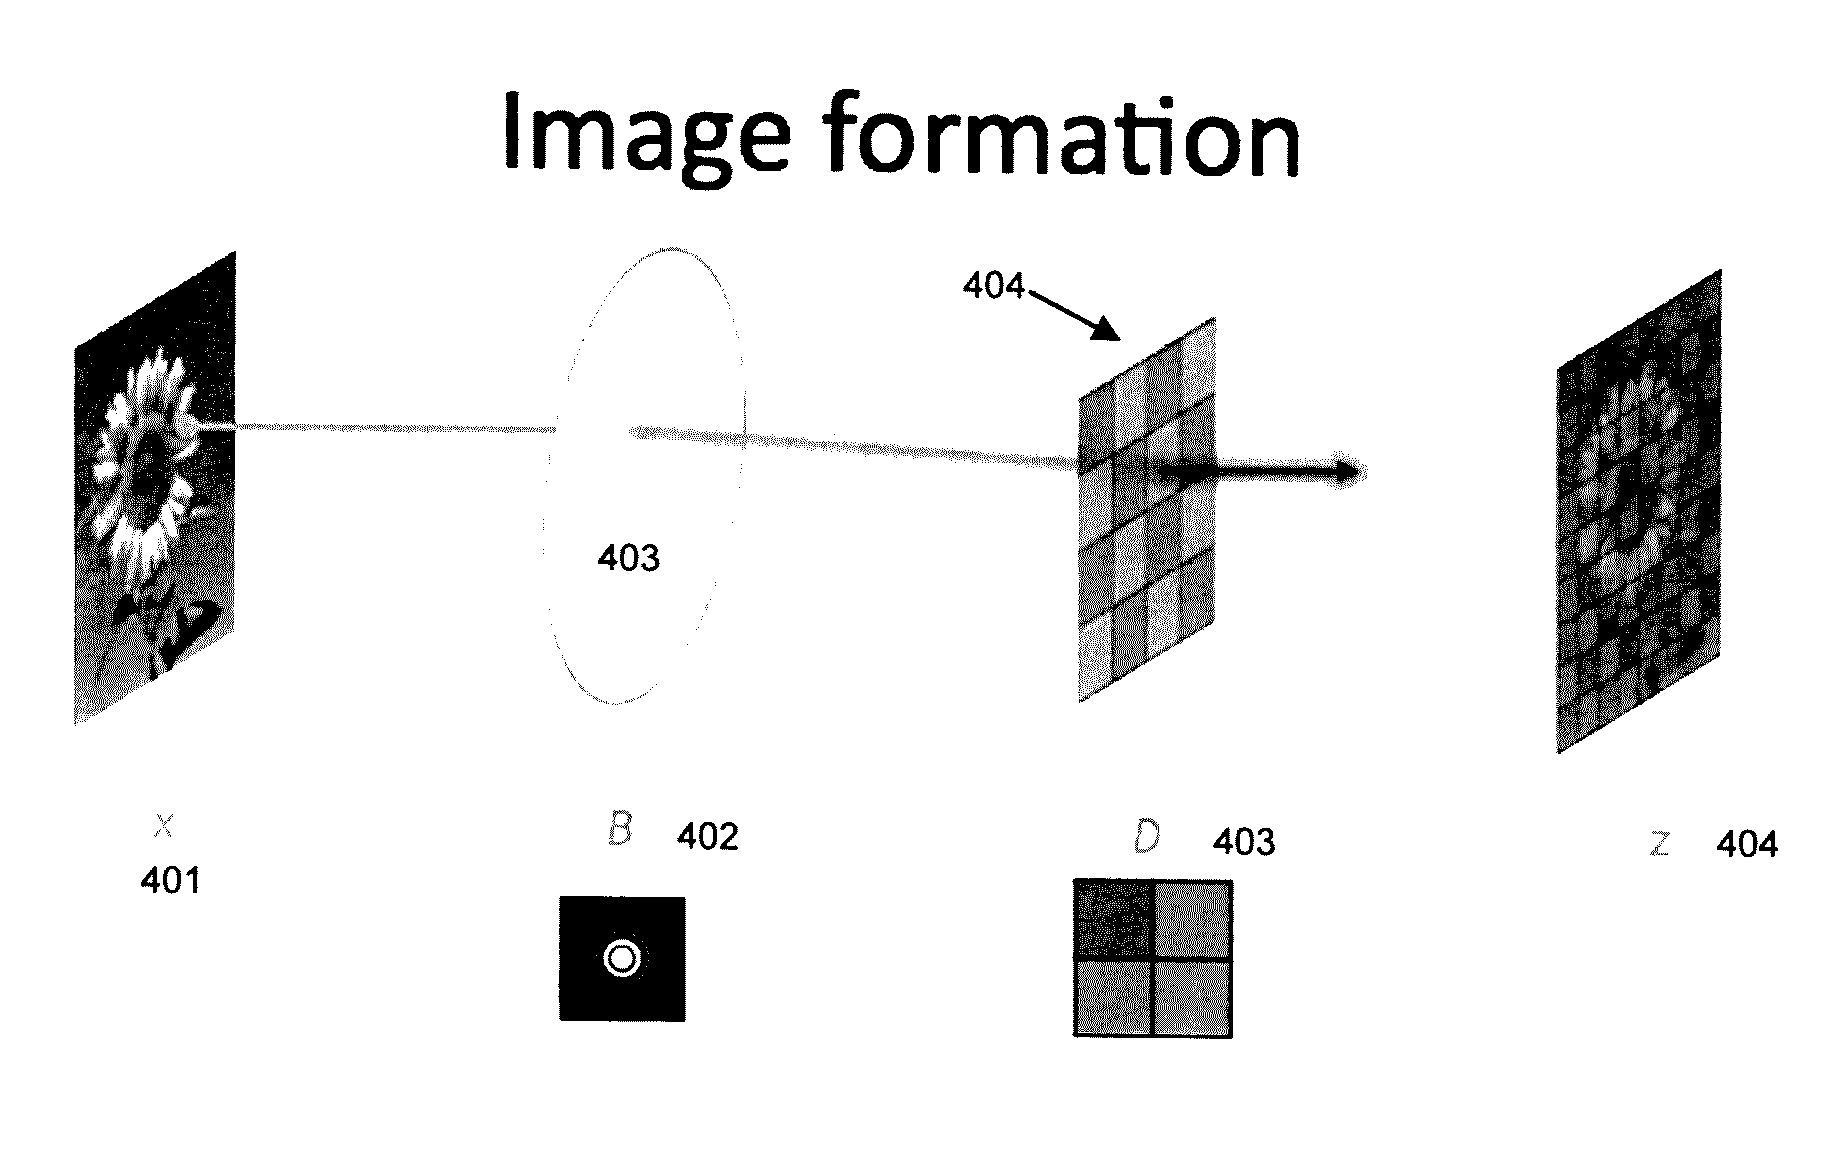 Unified optimization method for end-to-end camera image processing for translating a sensor captured image to a display image